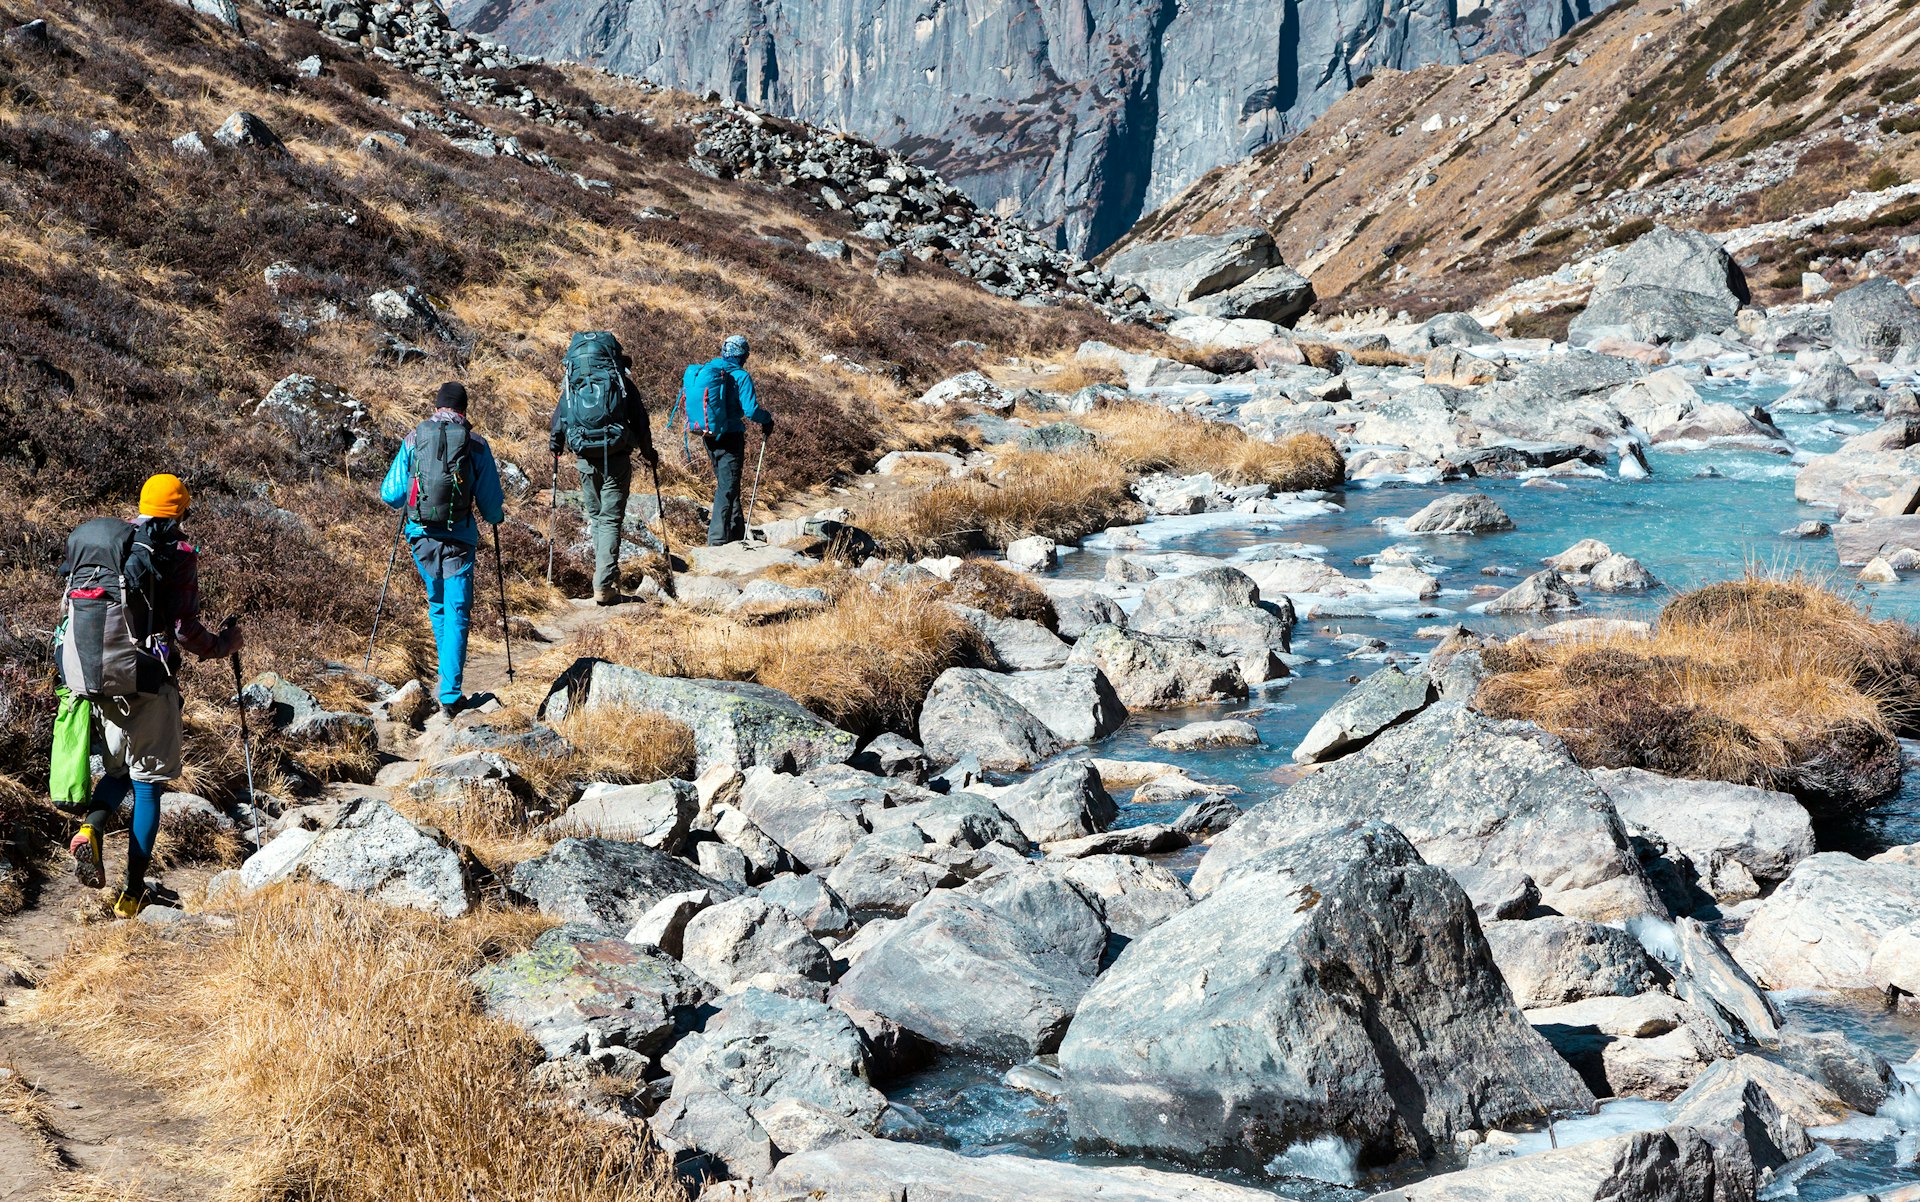 Features - Group of Hikers walking on Footpath in Mountains rear View